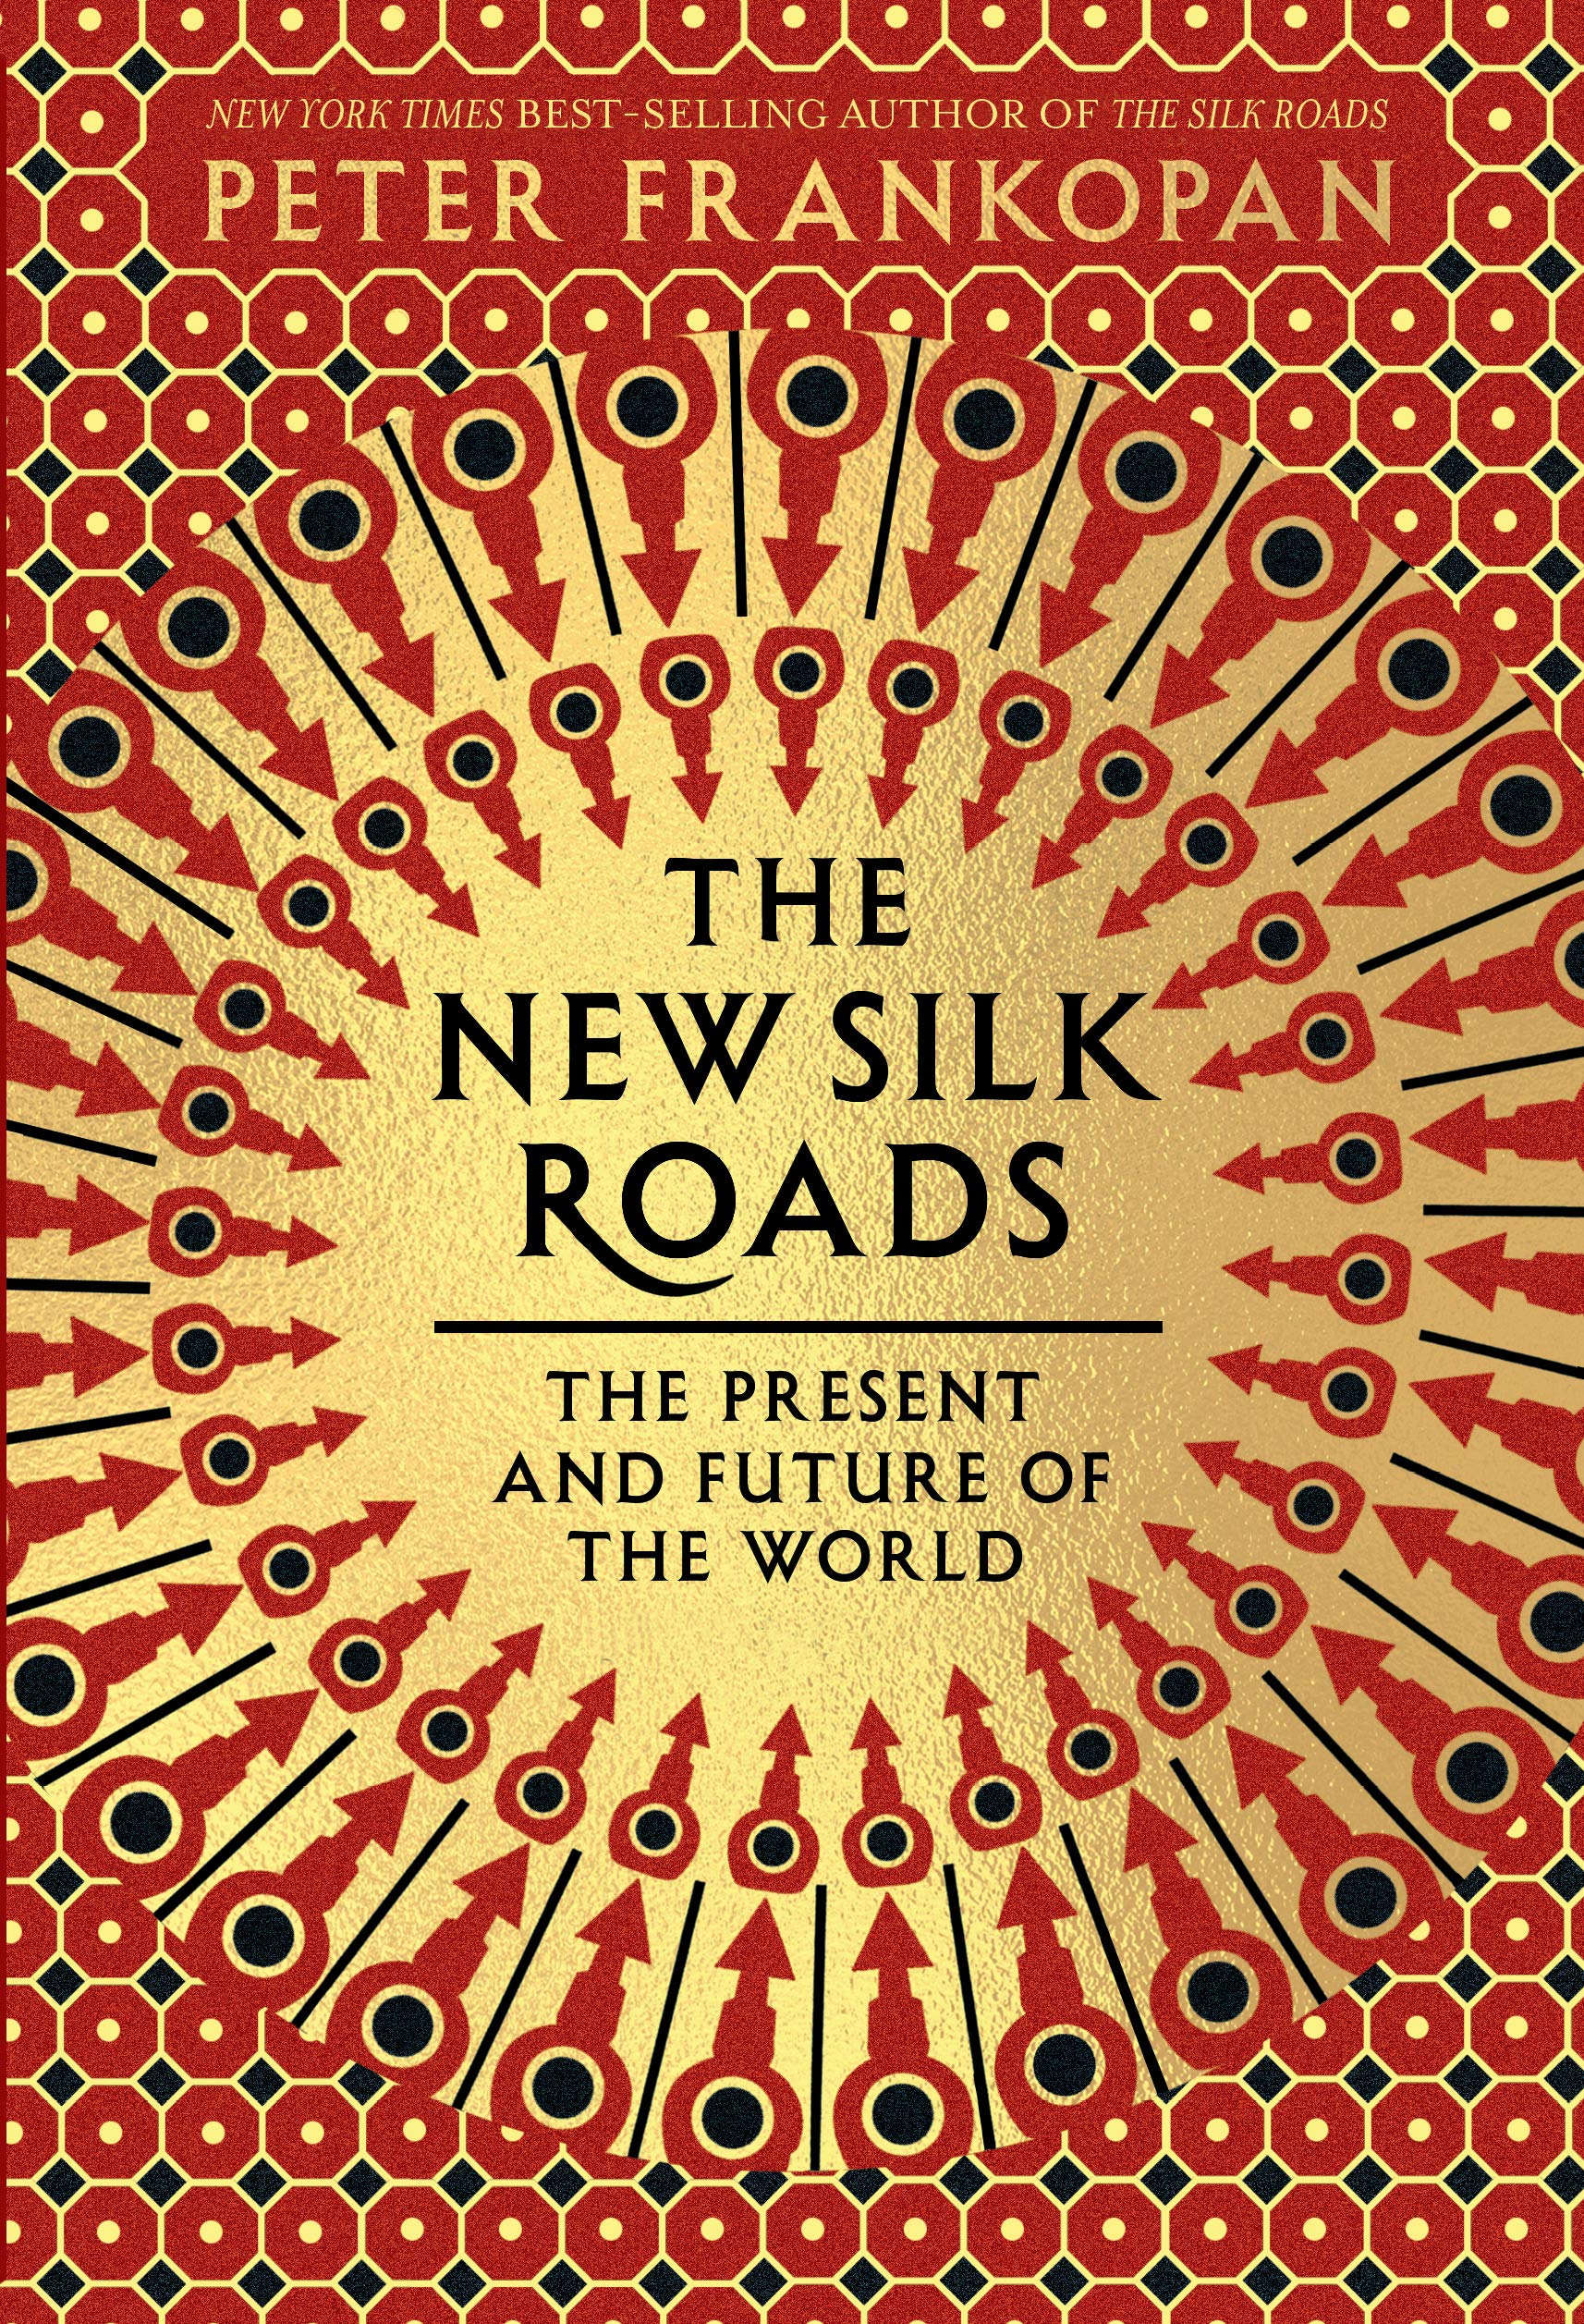 The new silk roads : the present and future of the world